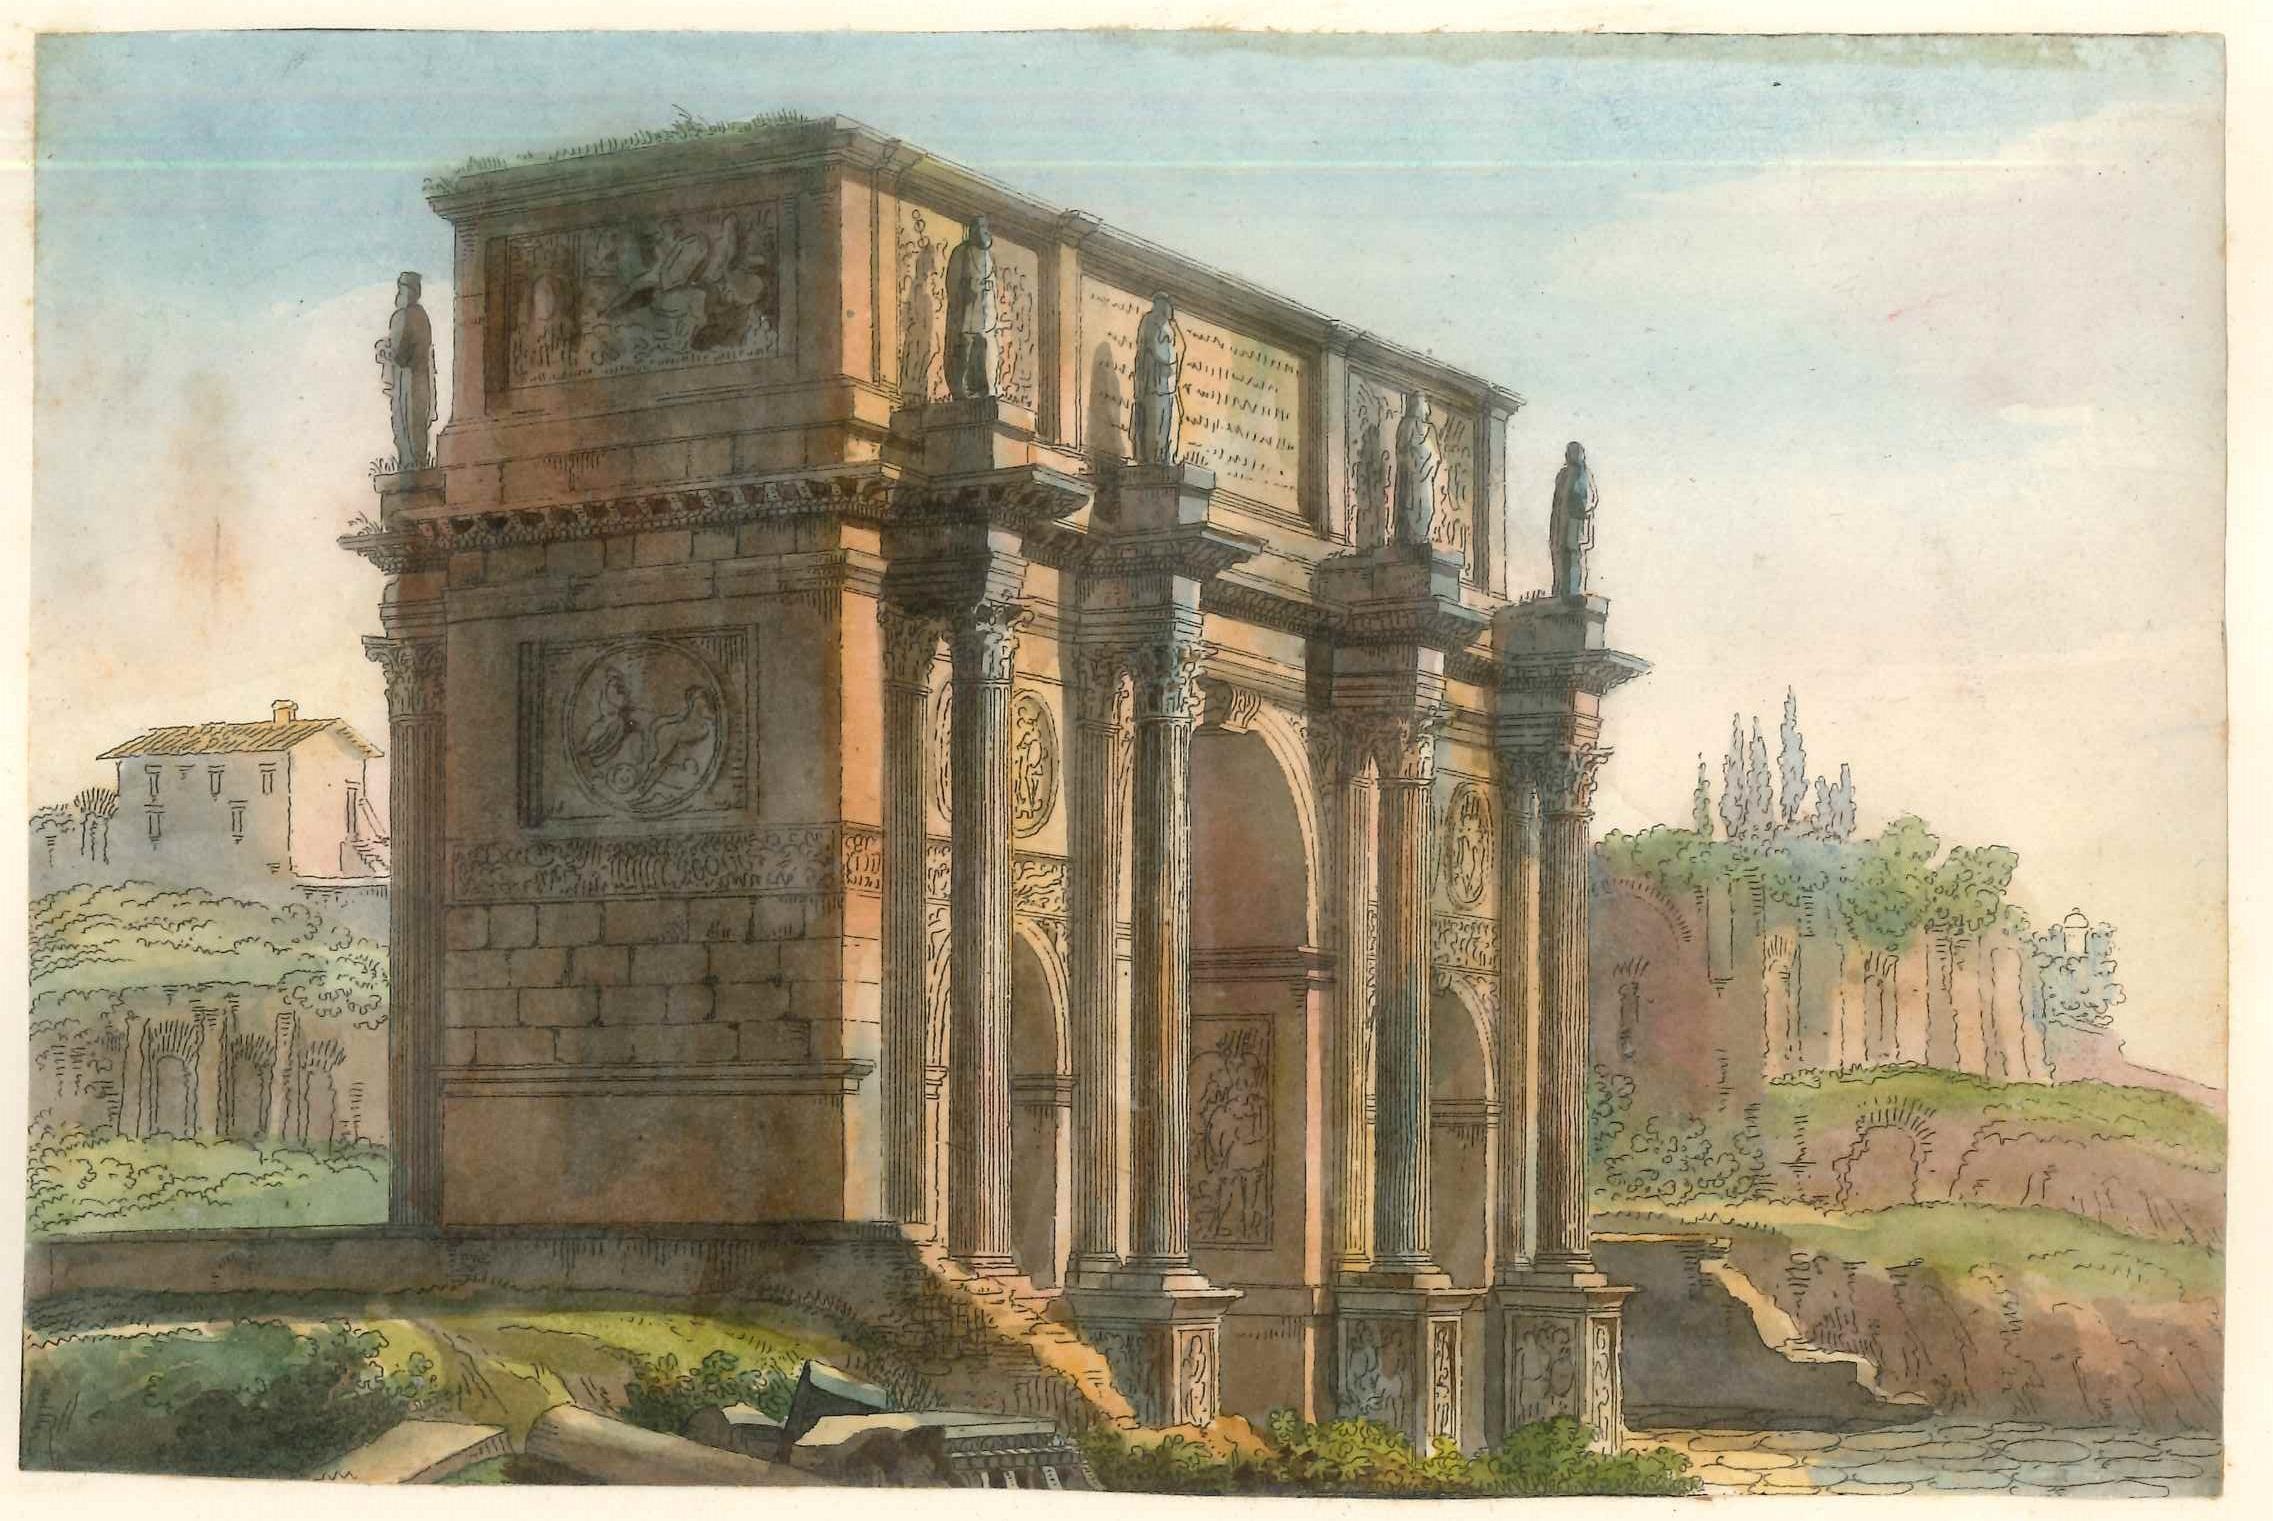 Triumphal Arches - Original Lithographs and Watercolors - Mid 19th Century - Brown Figurative Print by Unknown